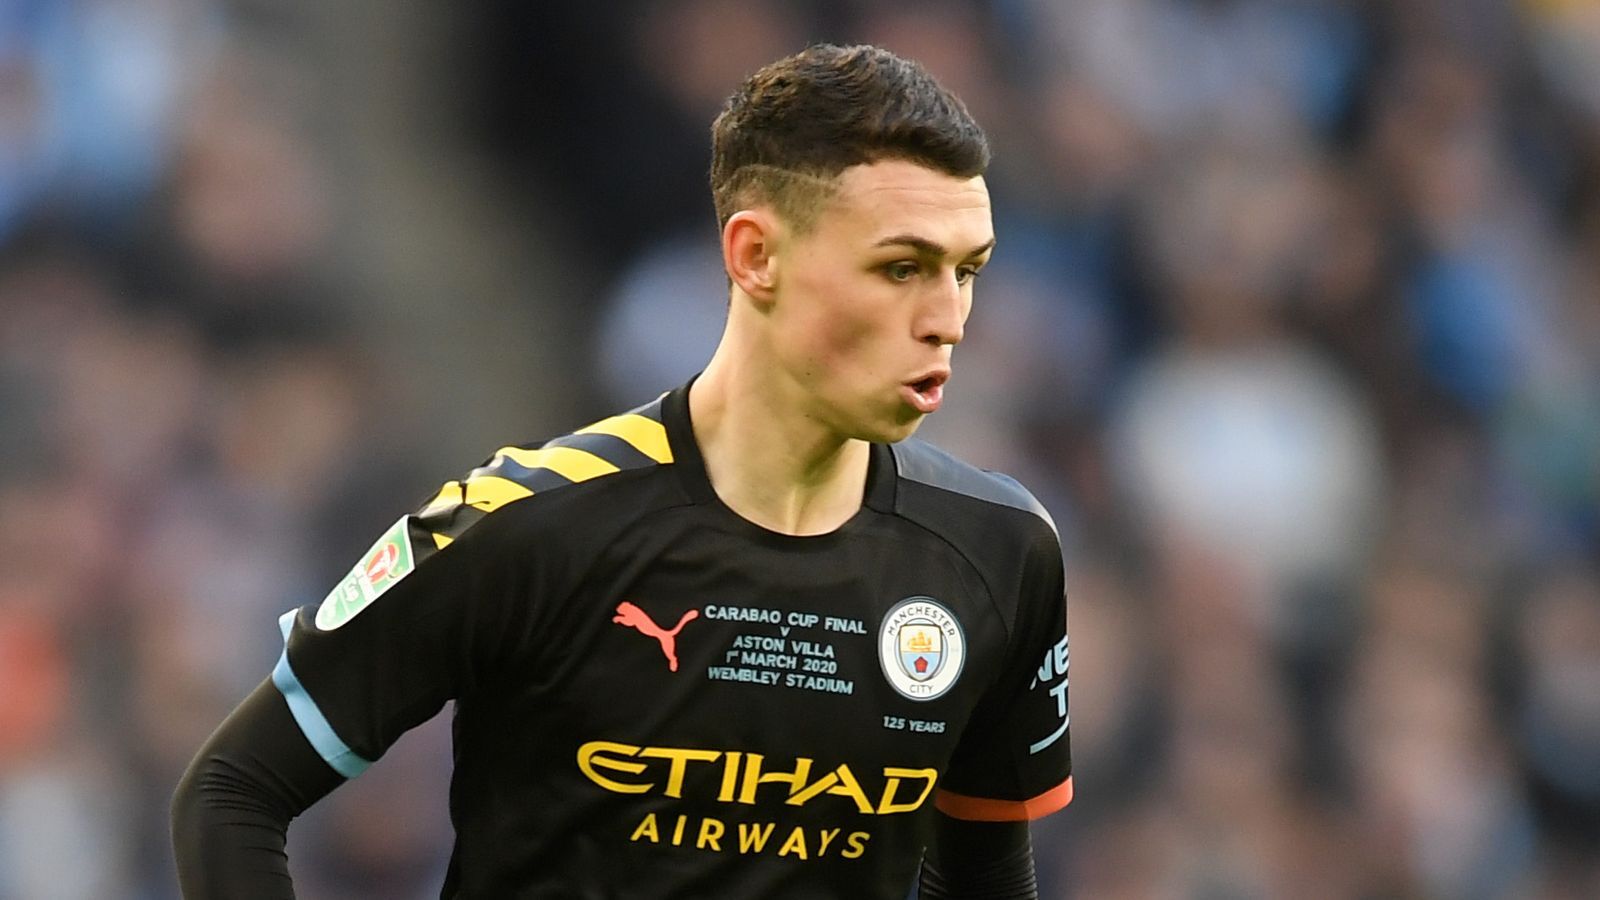 Manchester City Warns Phil Foden to Practice Social Distancing